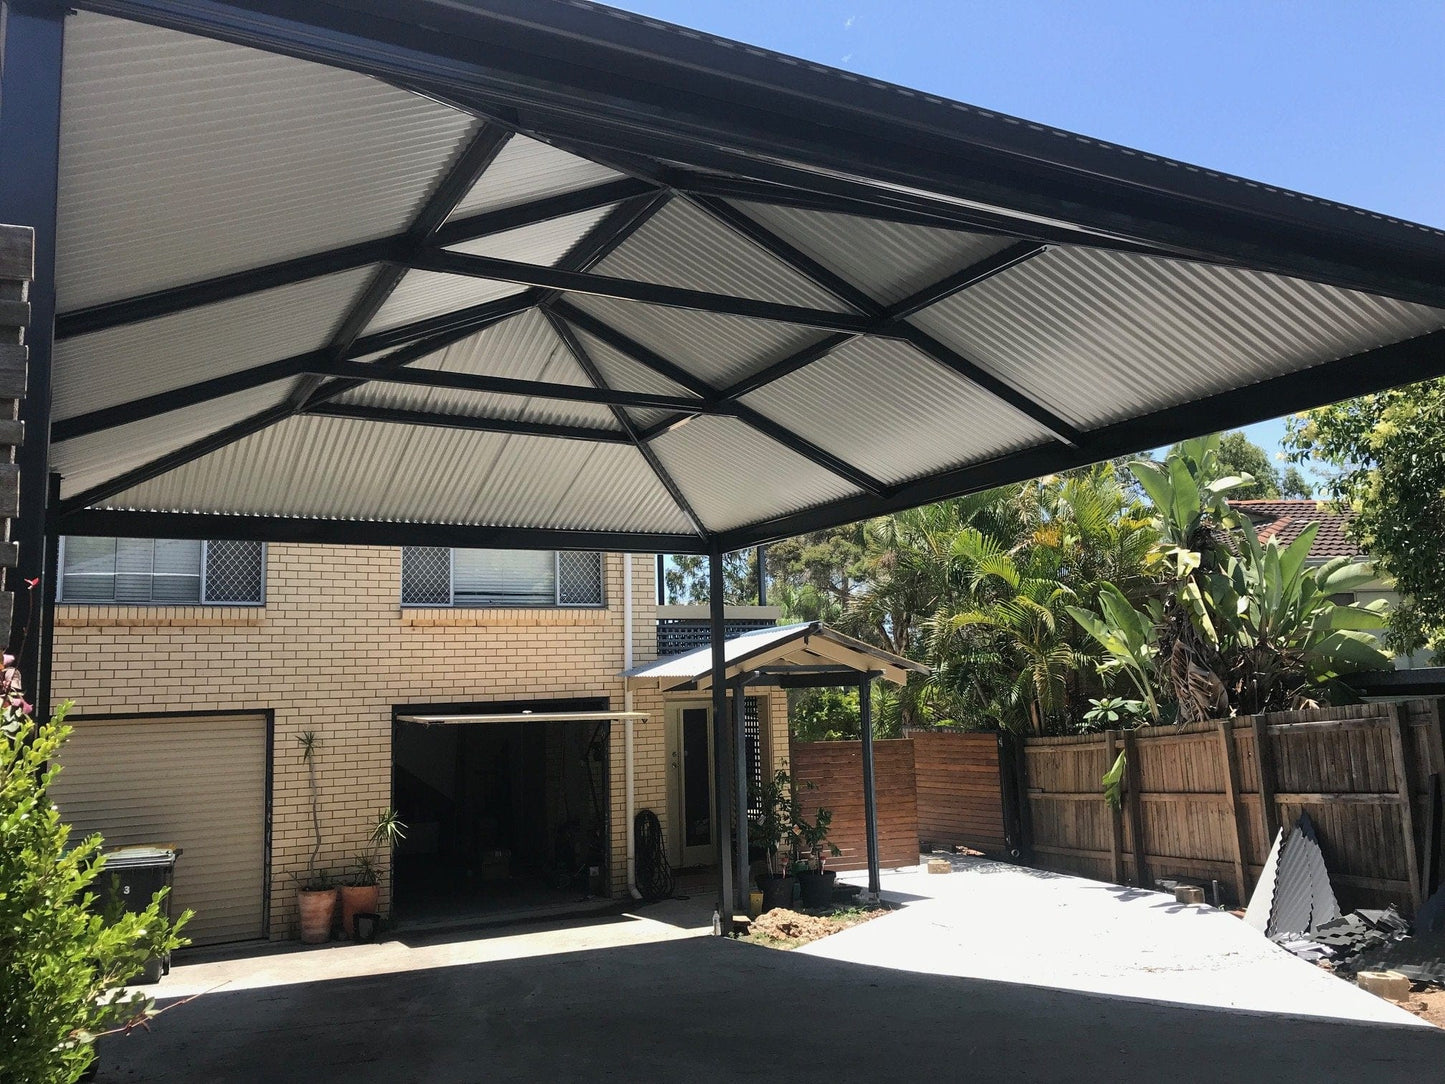 Insulated Gable Patio - 6m x 6m - Supply & Install QHI National